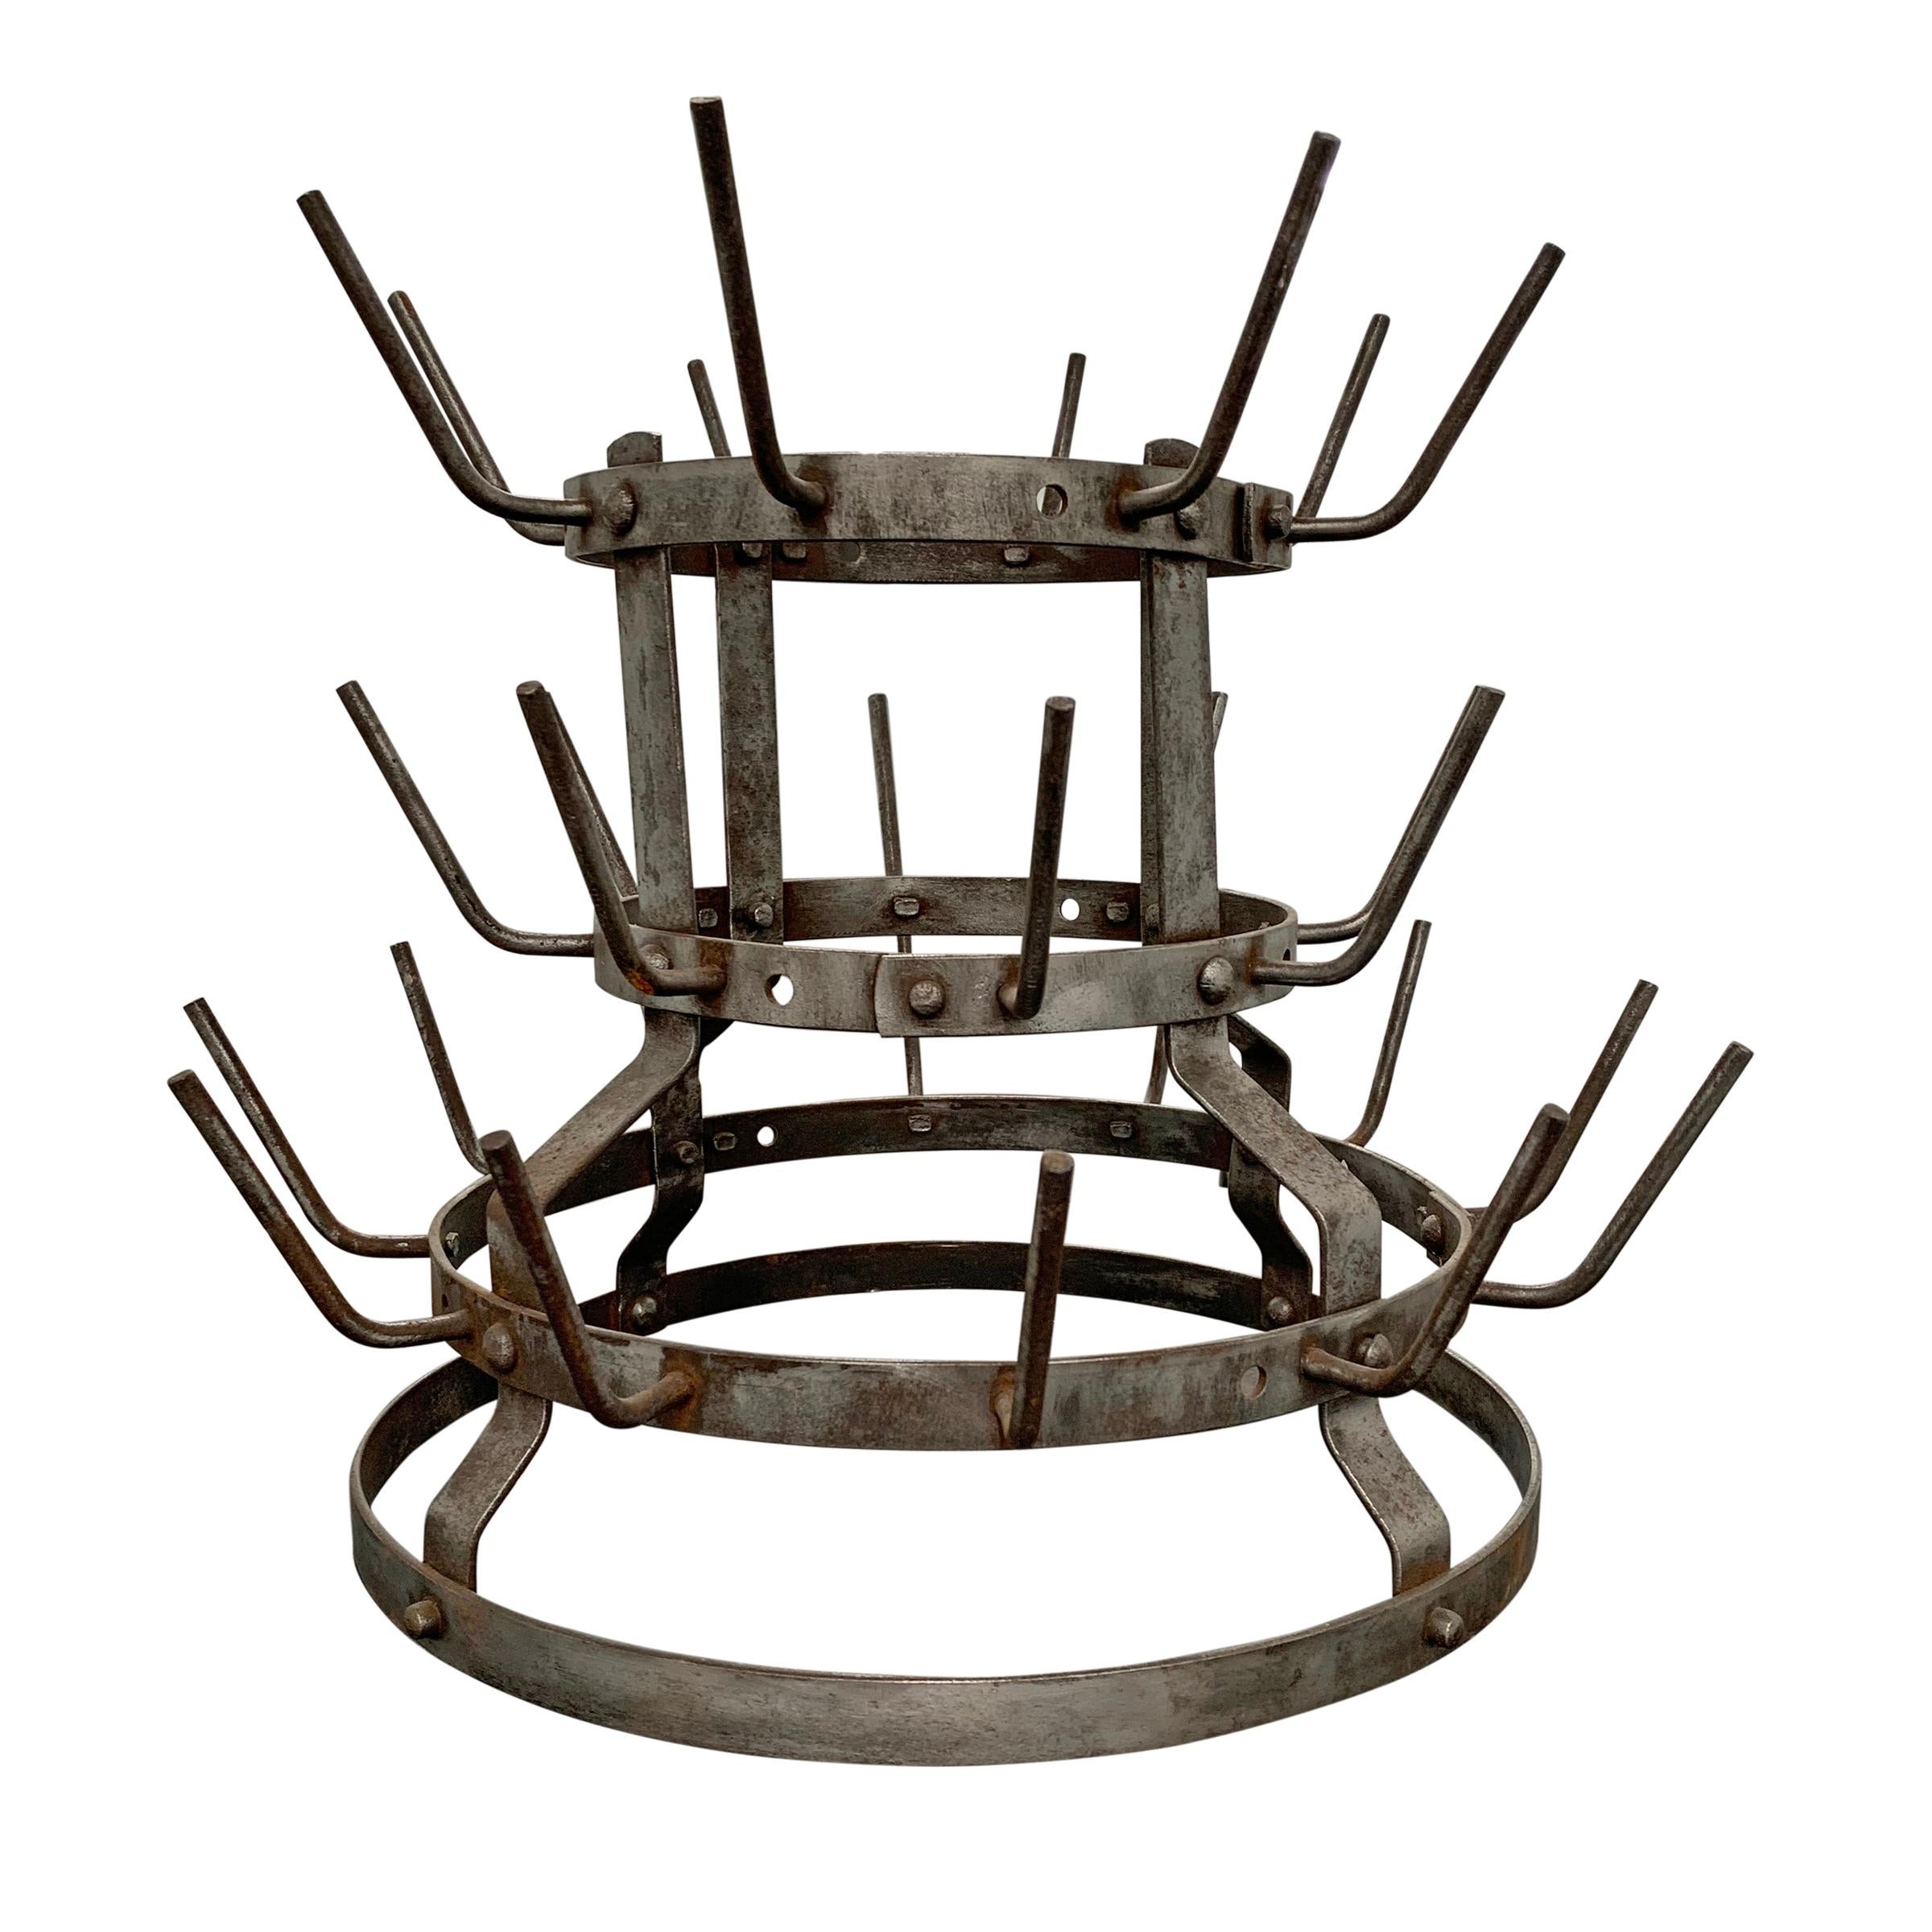 Early 20th century French bottle drying rack with three tiers. Racks like this were used in vineyards to dry used wine bottles.